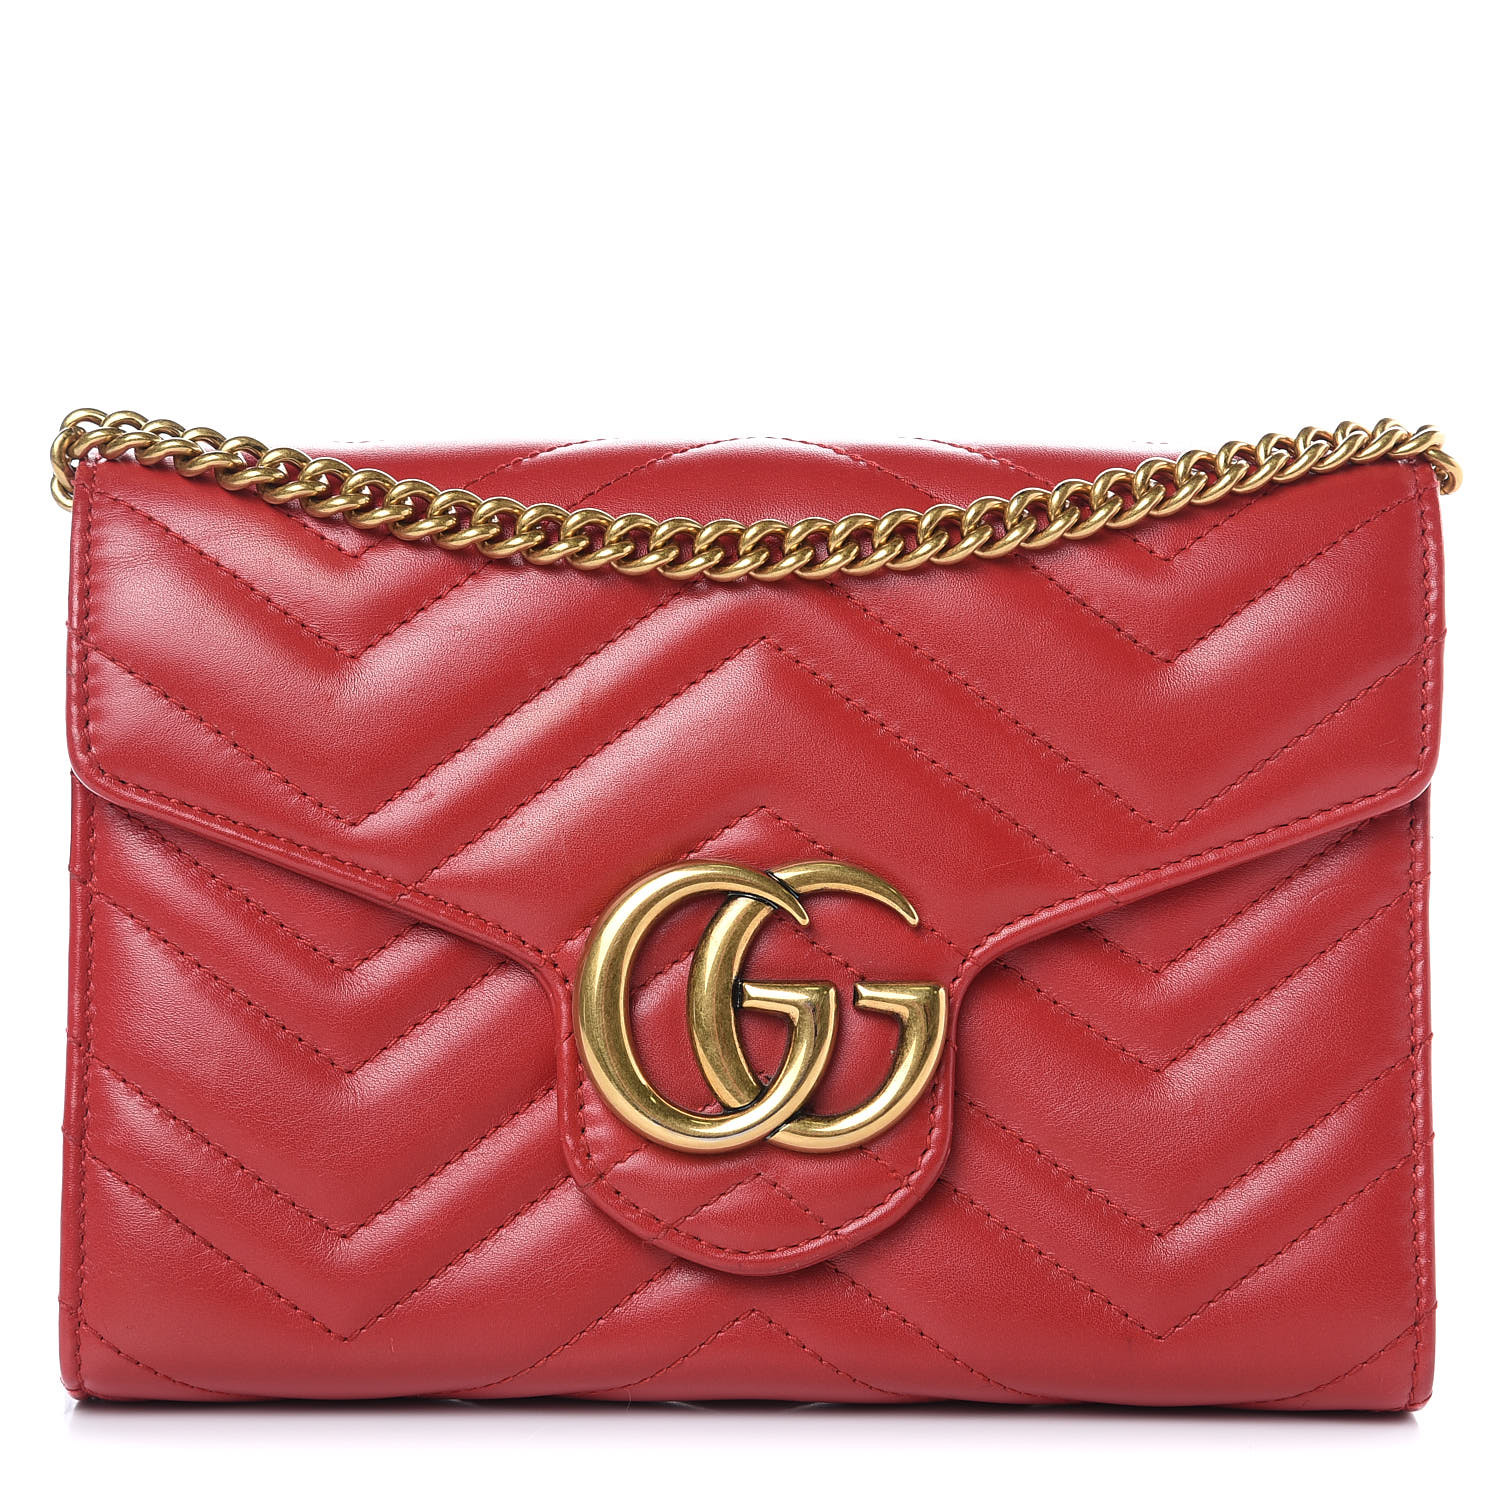 GUCCI Calfskin Matelasse GG Marmont Chain Wallet Red 397959